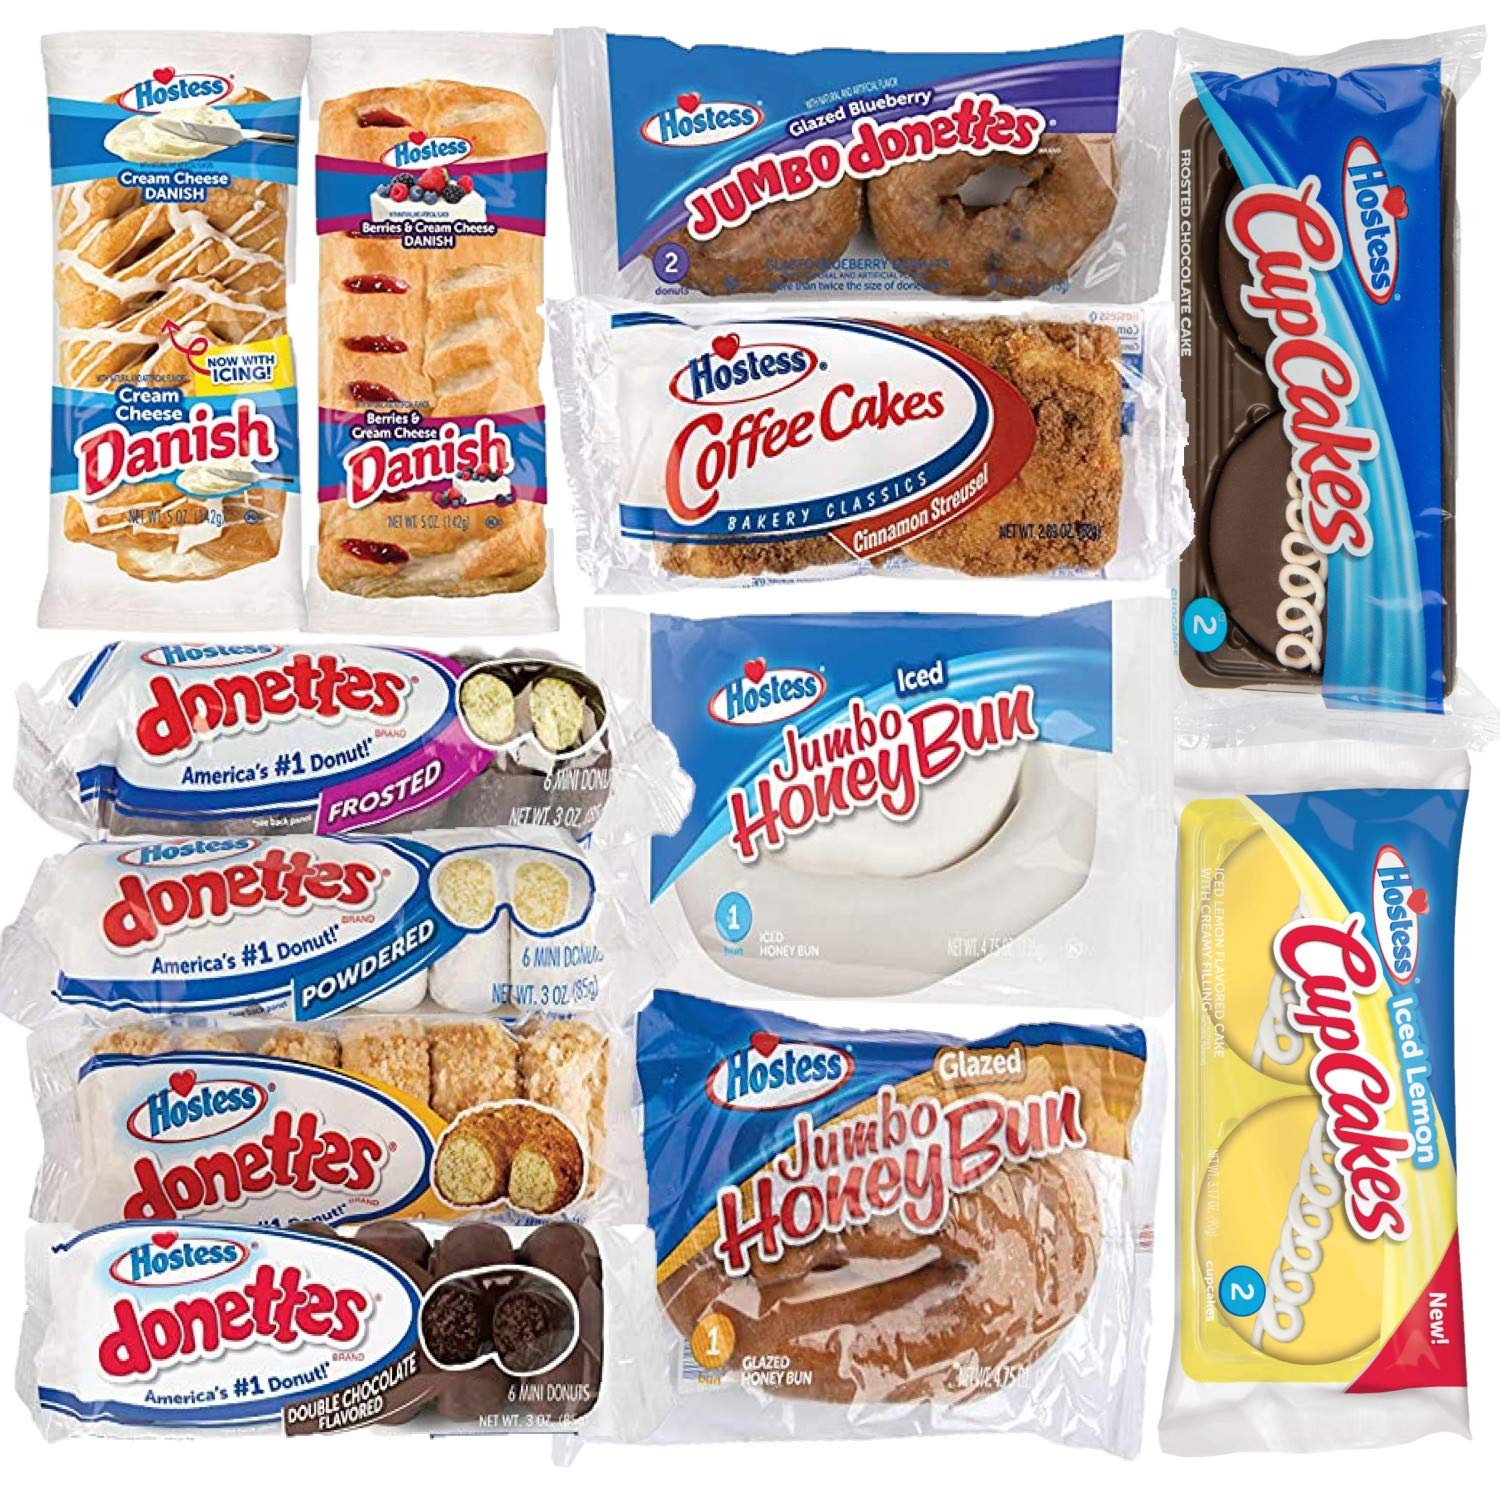 Hostess Cupcakes Frosted Chocolate Cake Singles (USA) – The Sugar Shack